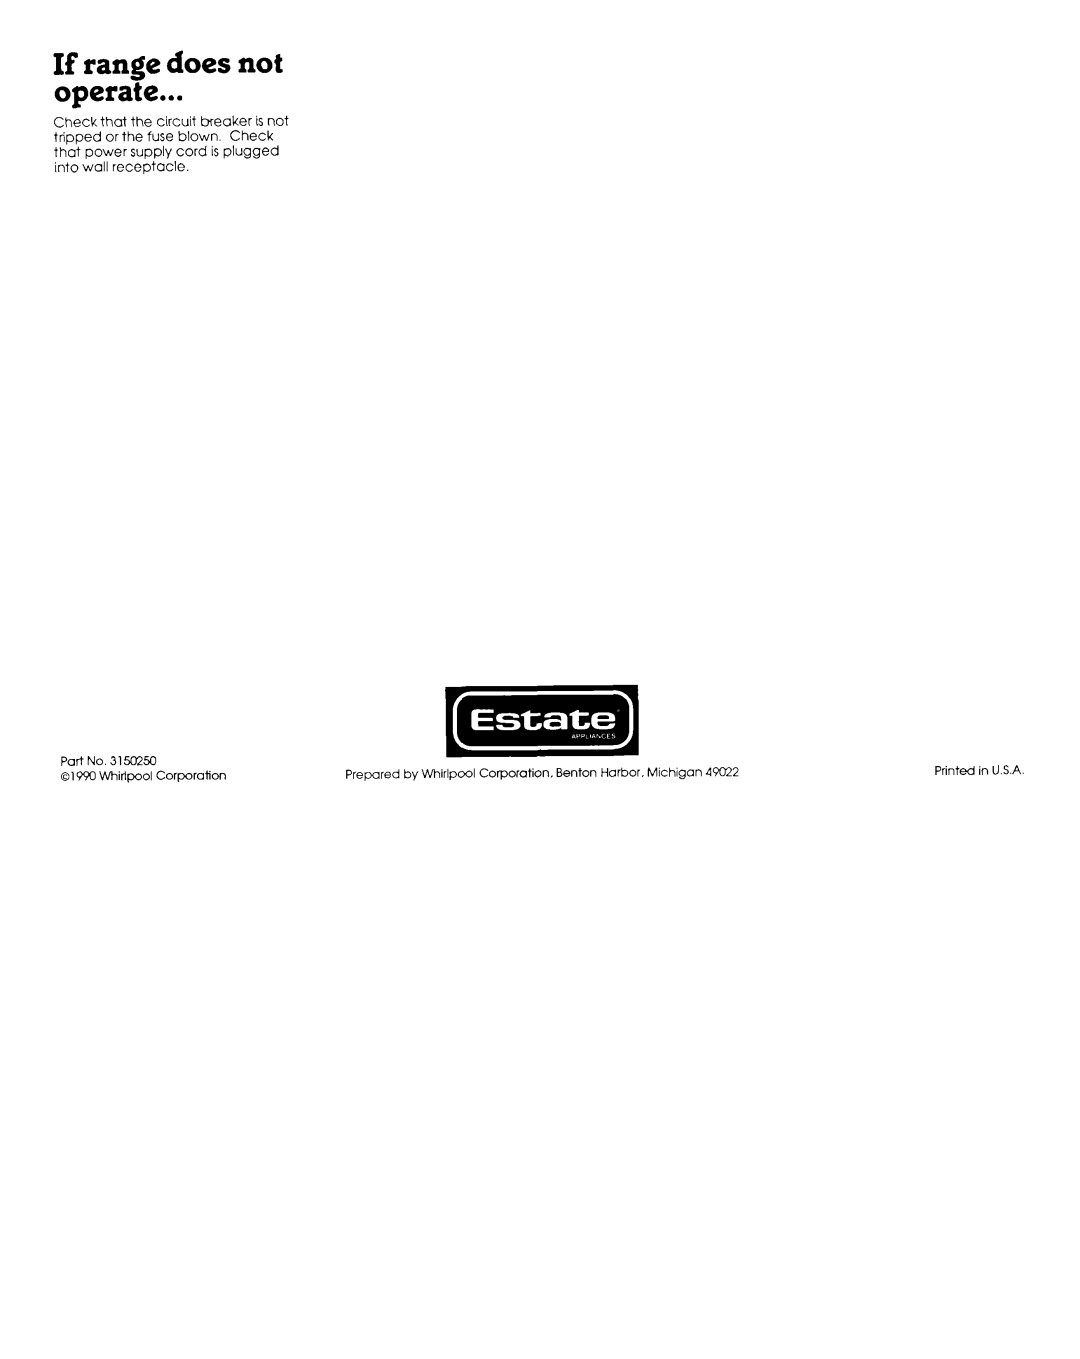 Estate 3150250 manual WI Whirlpool Corporation, If range does not operate 